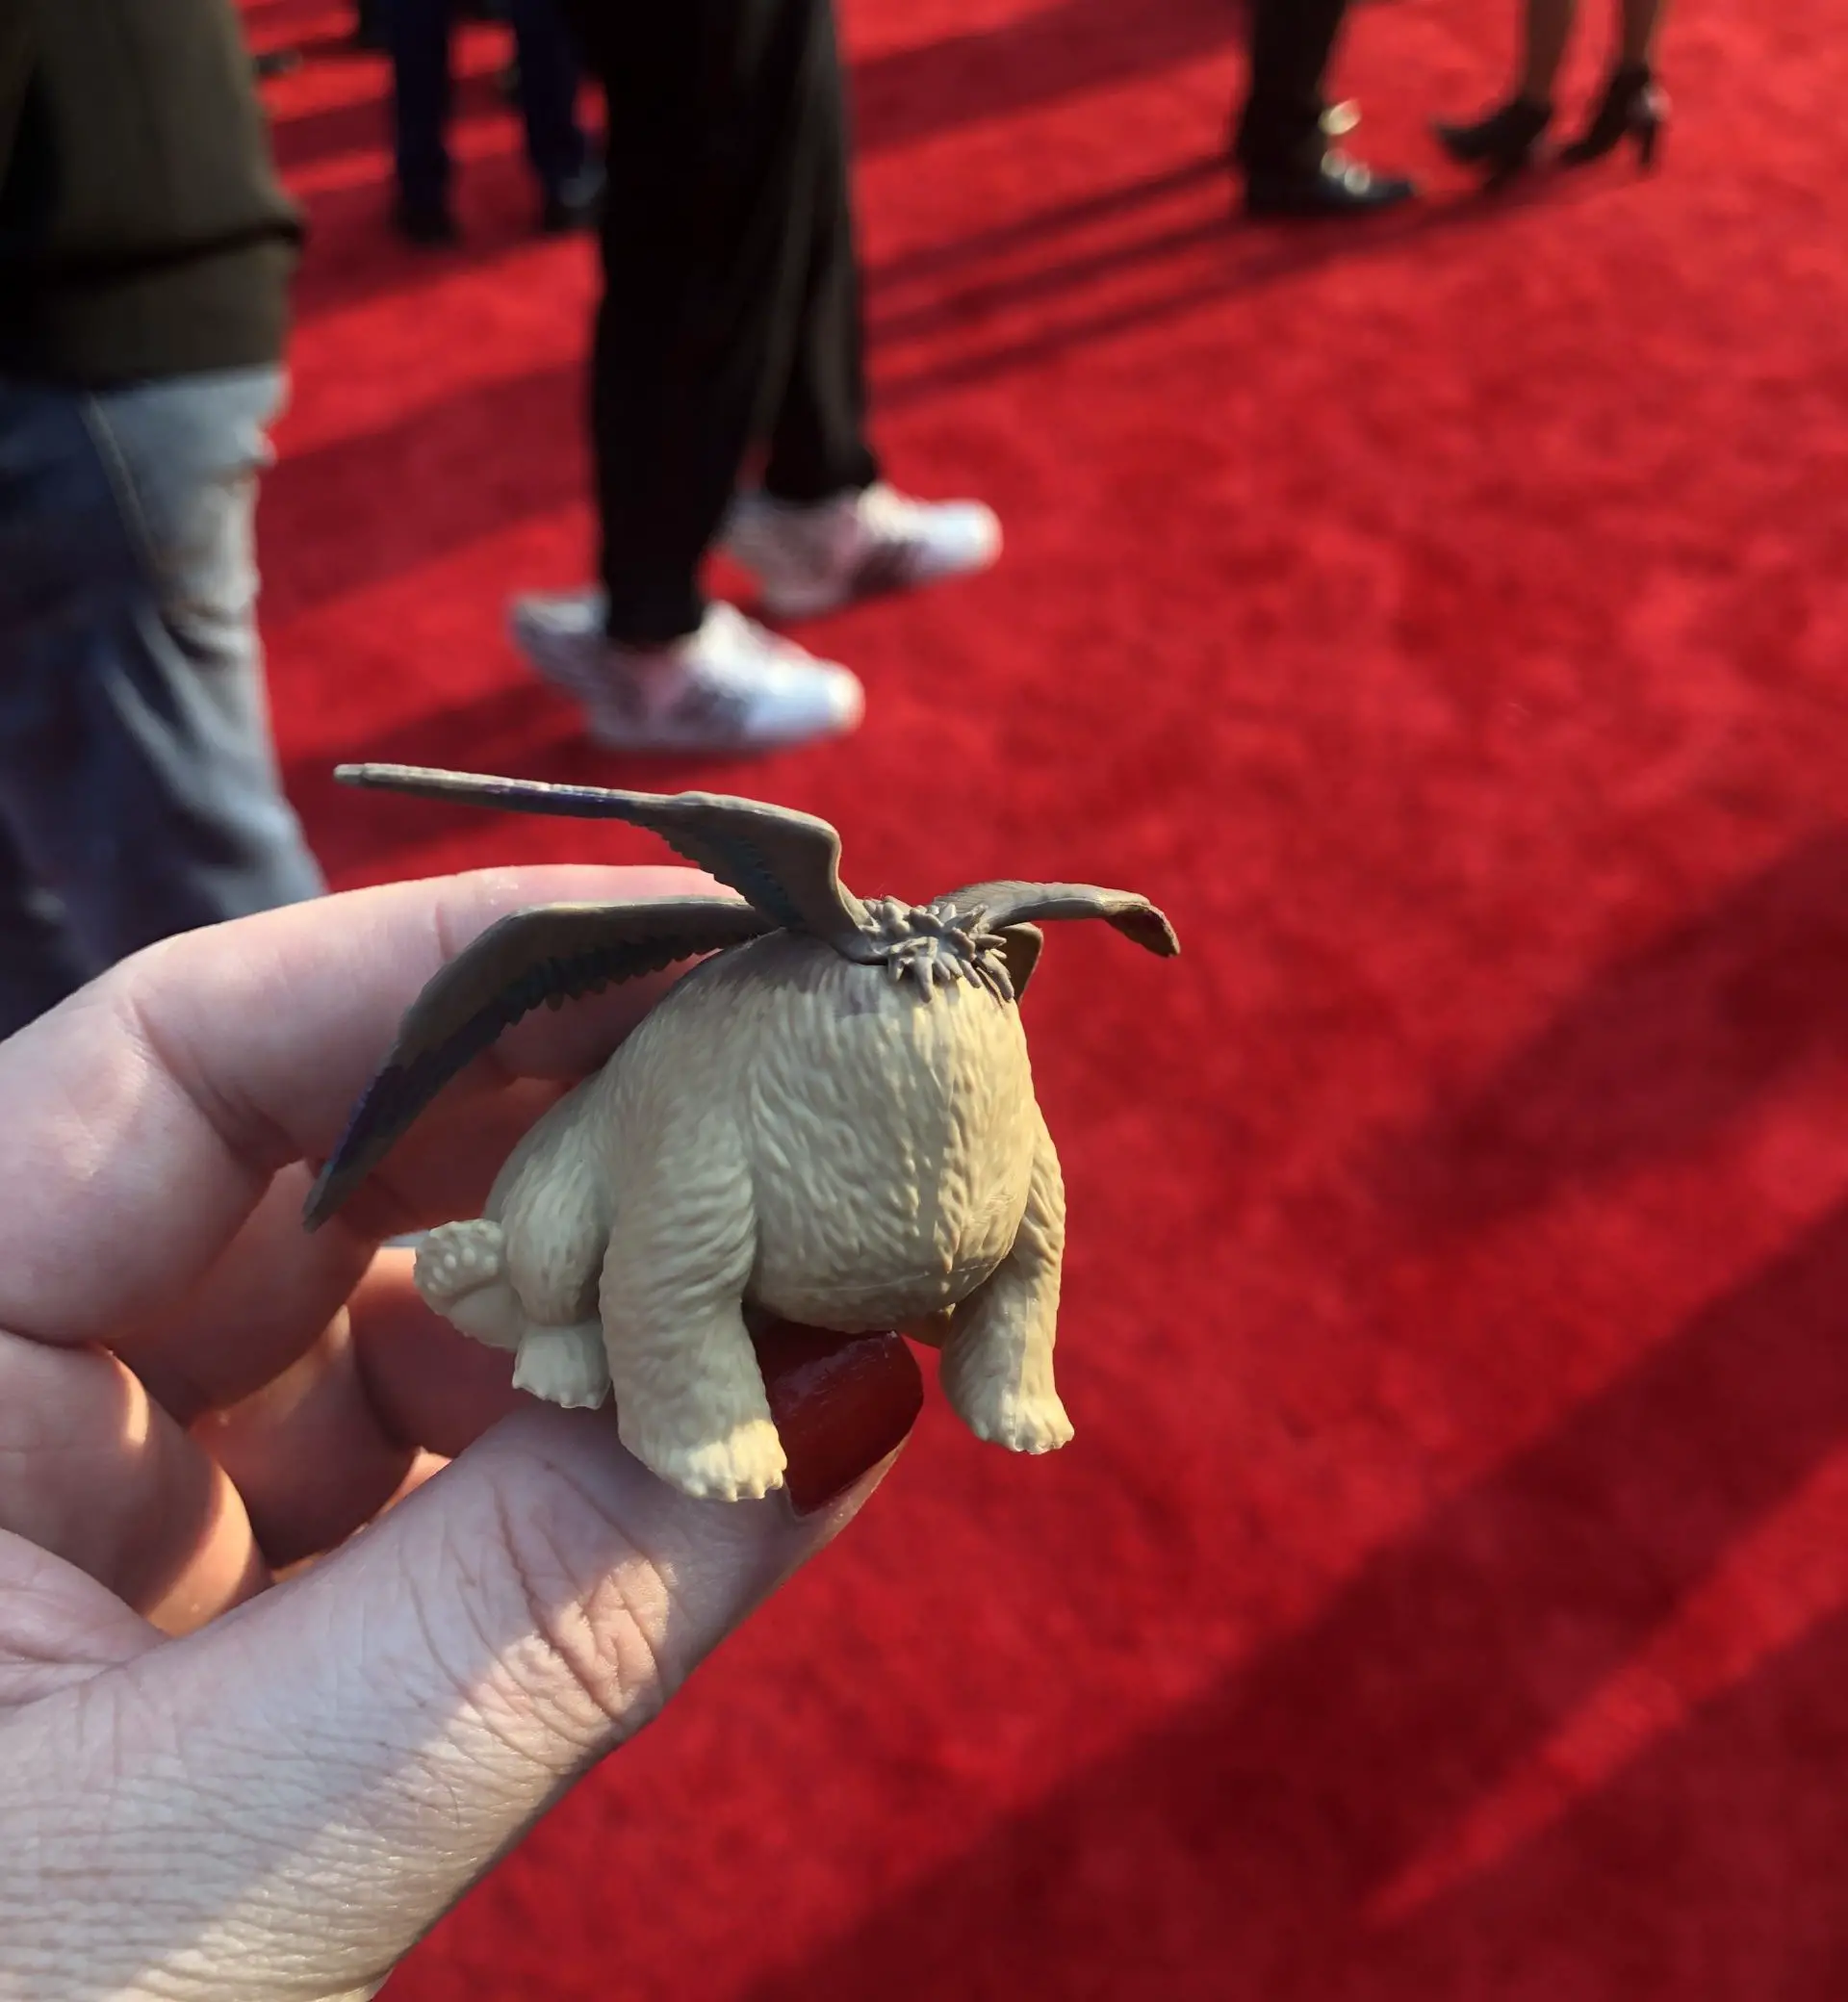 Morris was spotted on the Red Carpet at the Shang-Chi and the Legend of the Ten Rings world premiere in Los Angeles